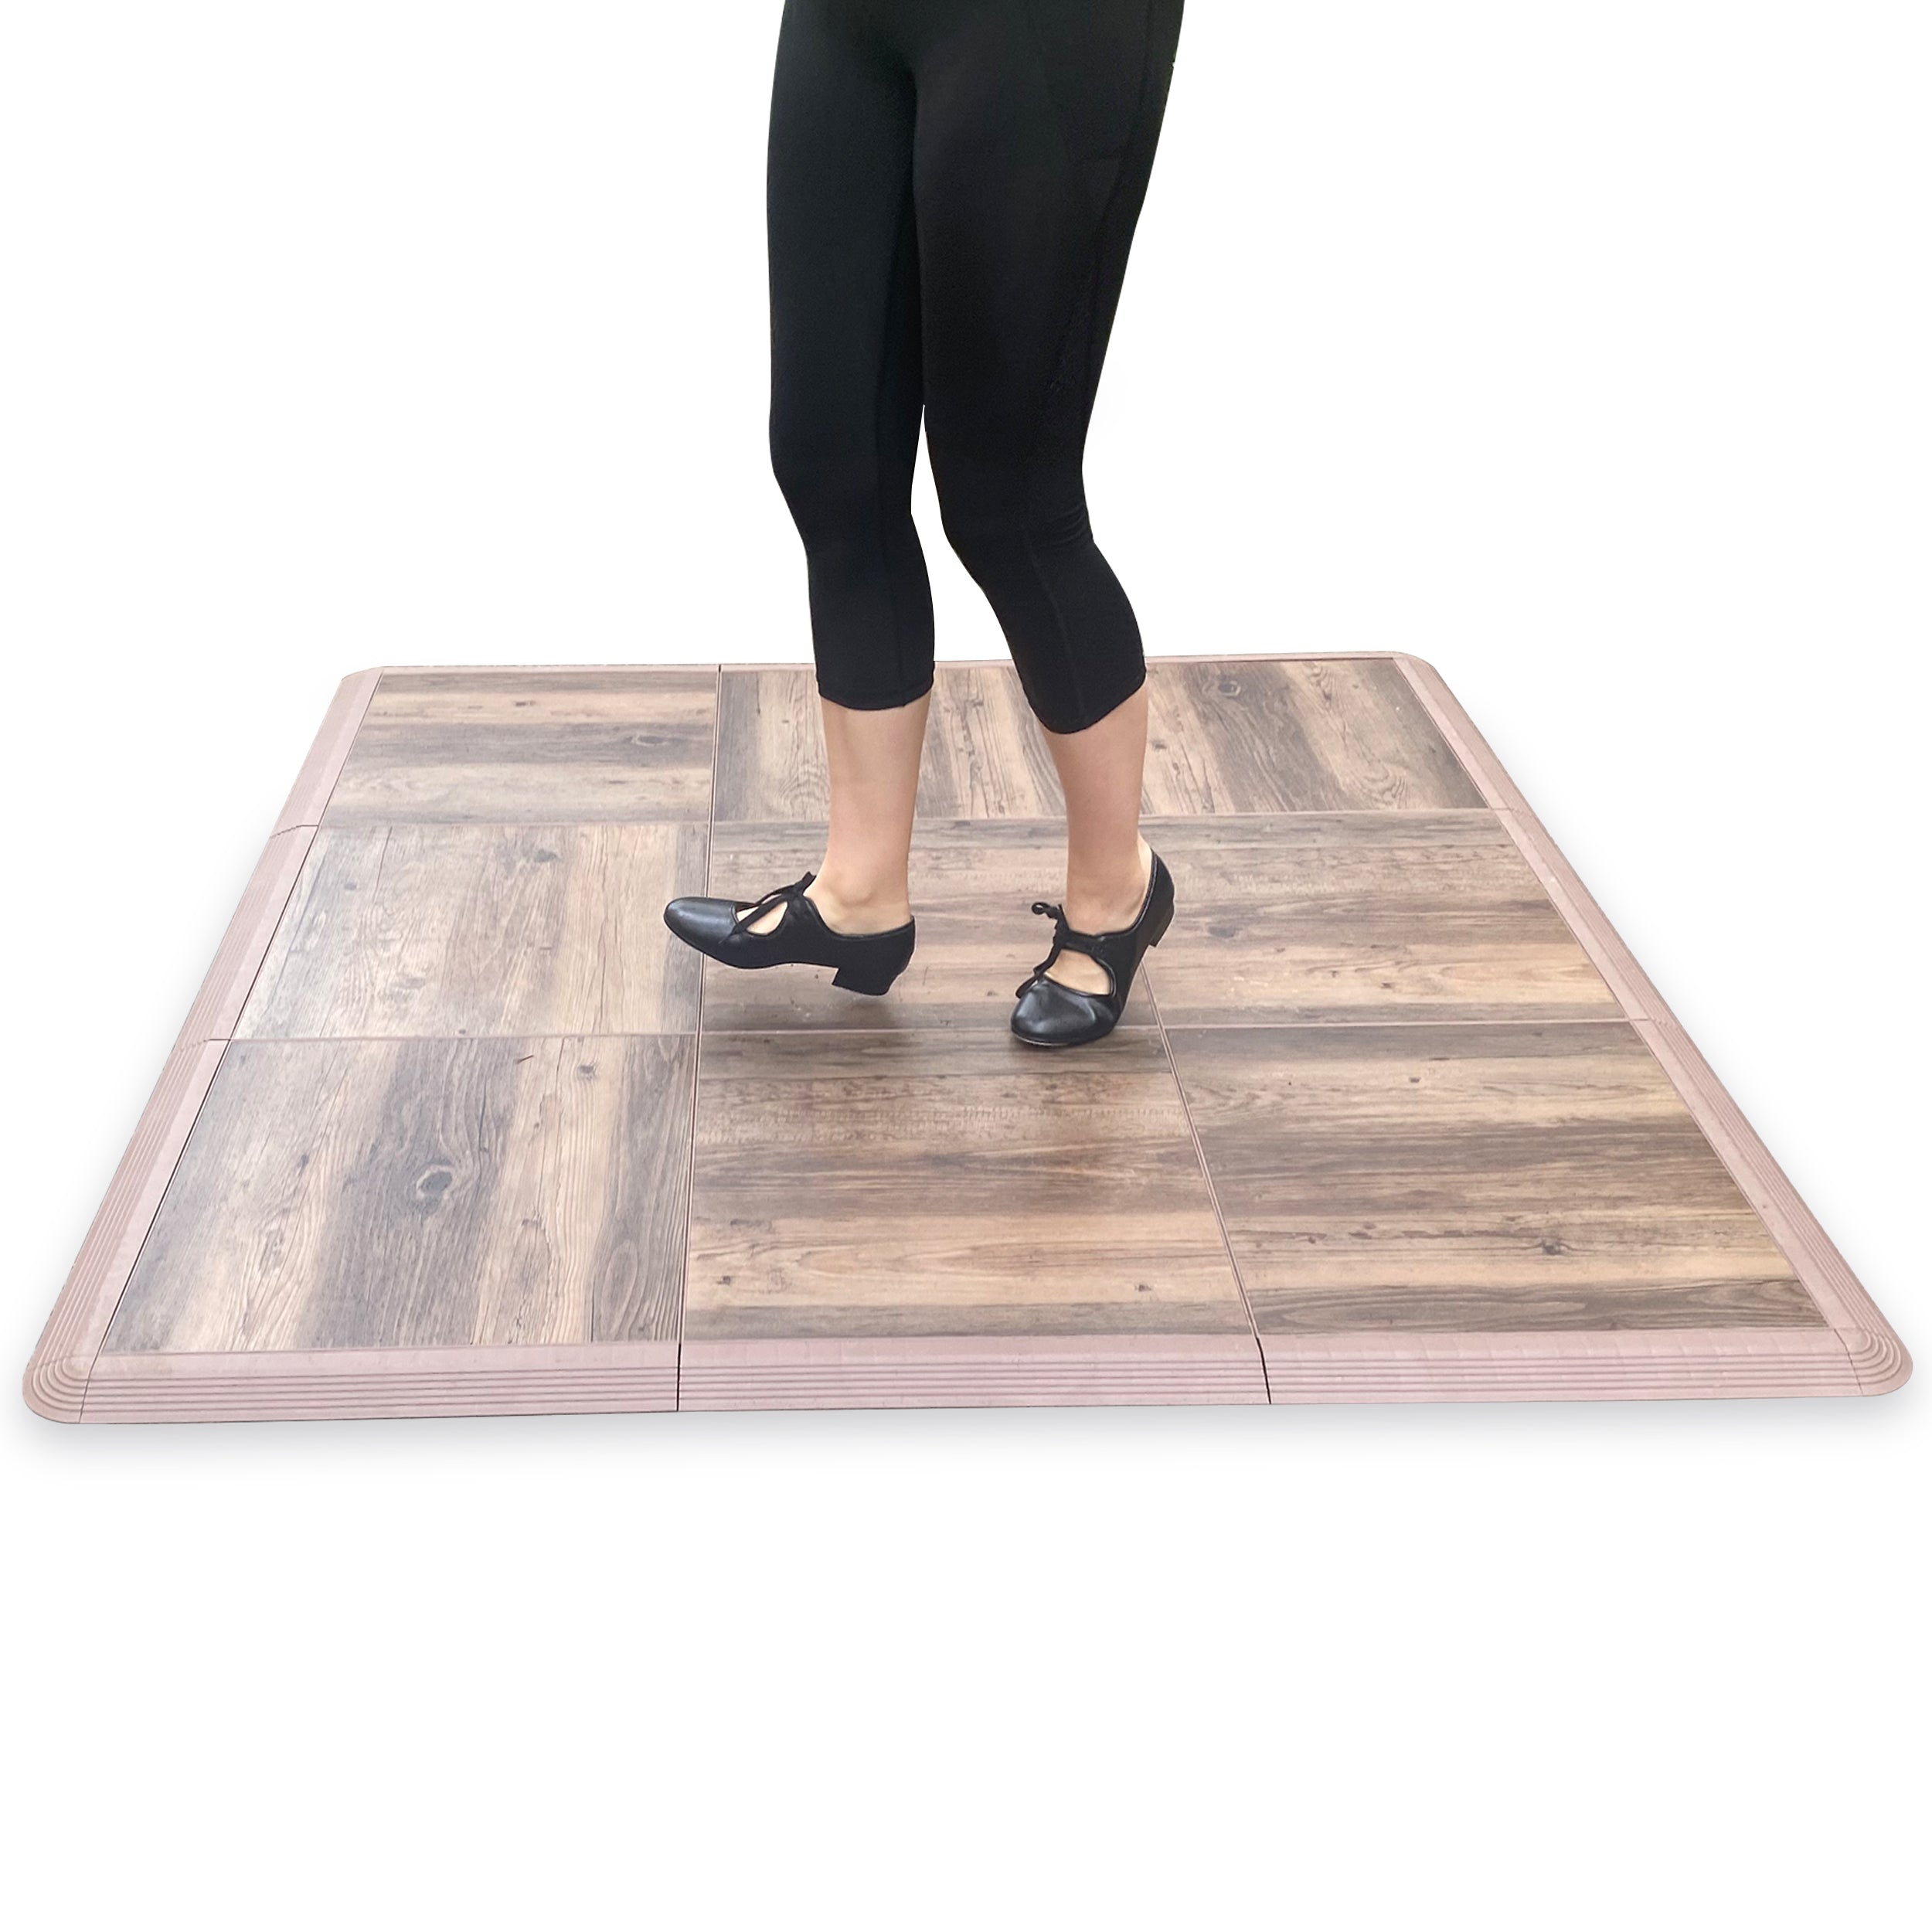 Shop the Best Selection of artan balance tap dance floor Products